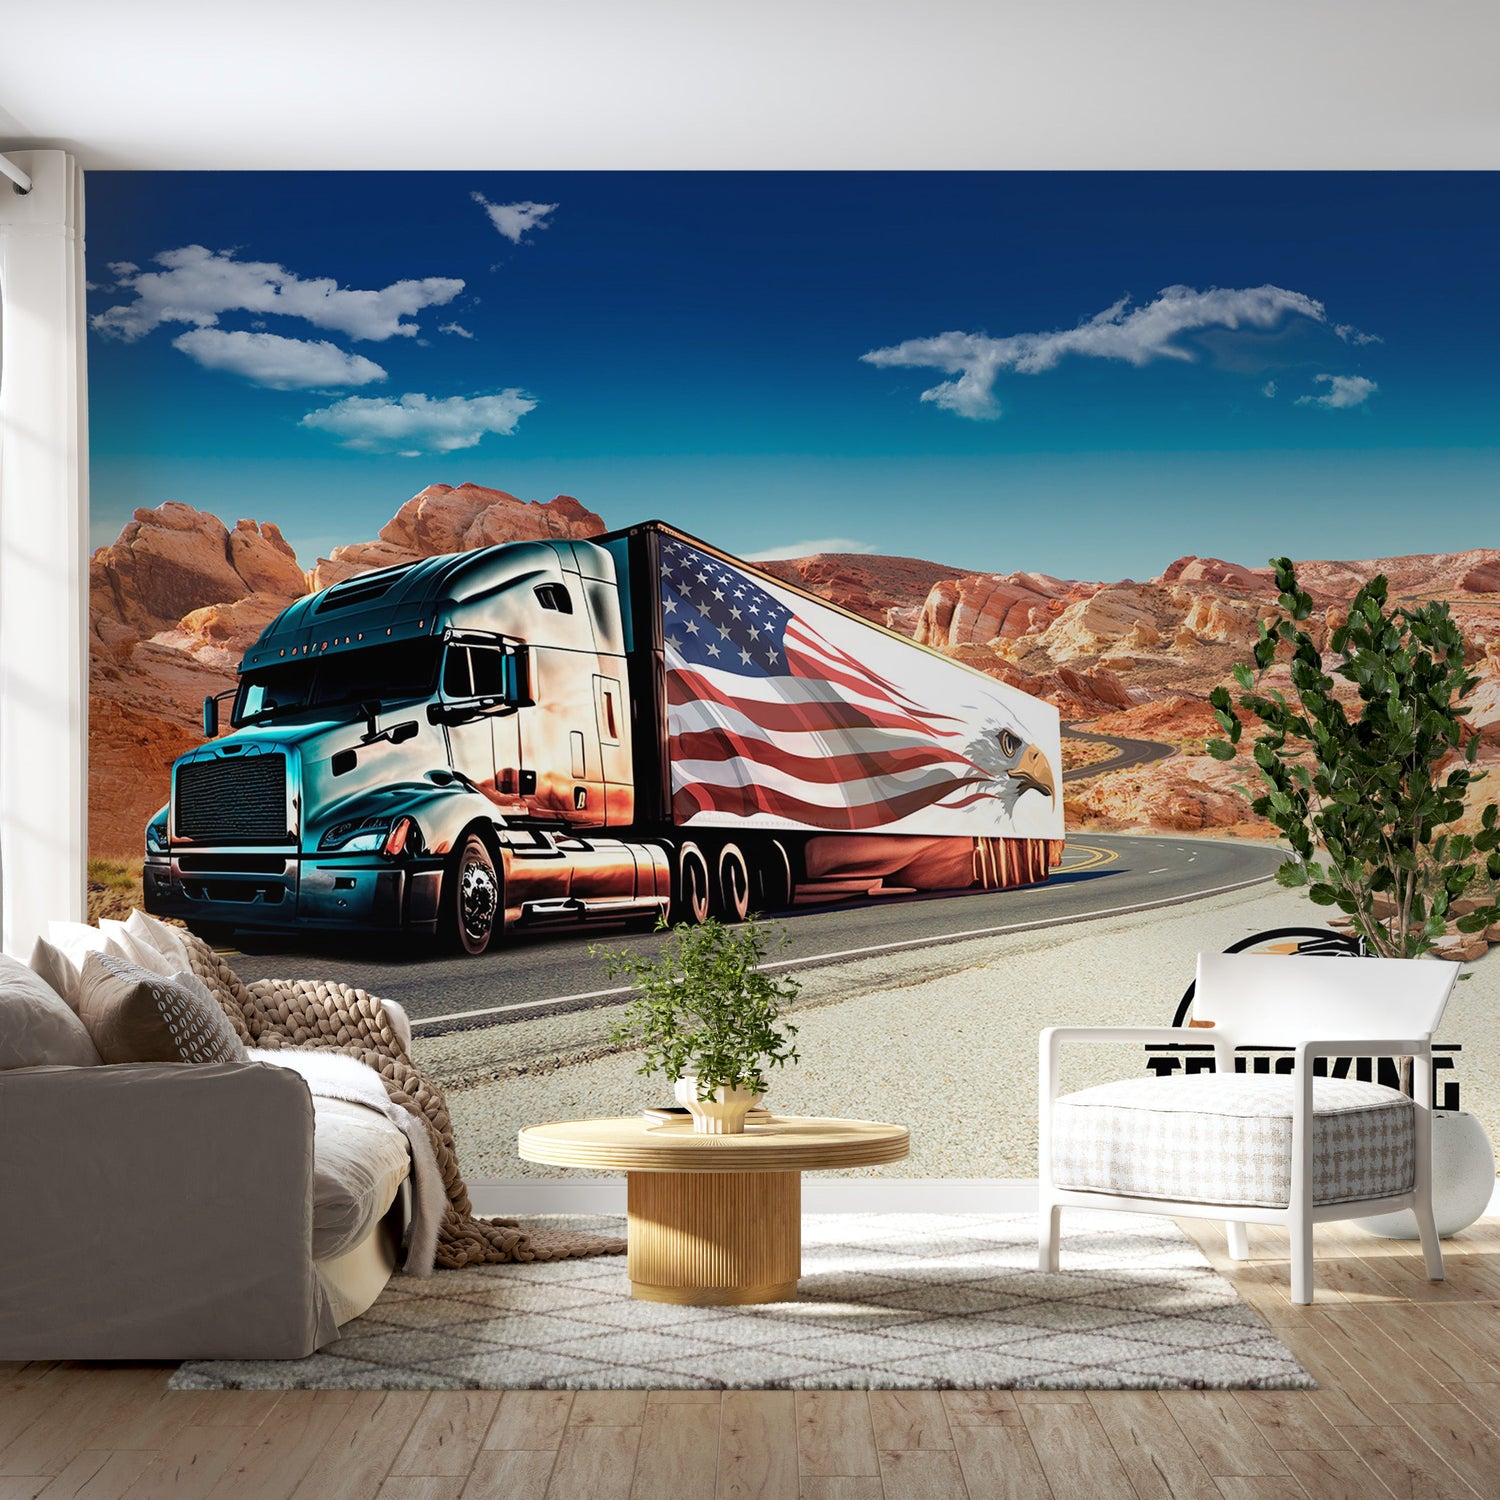 Peel & Stick Americana Wall Mural - Eagle Truck - Removable Wall Decals-Tiptophomedecor